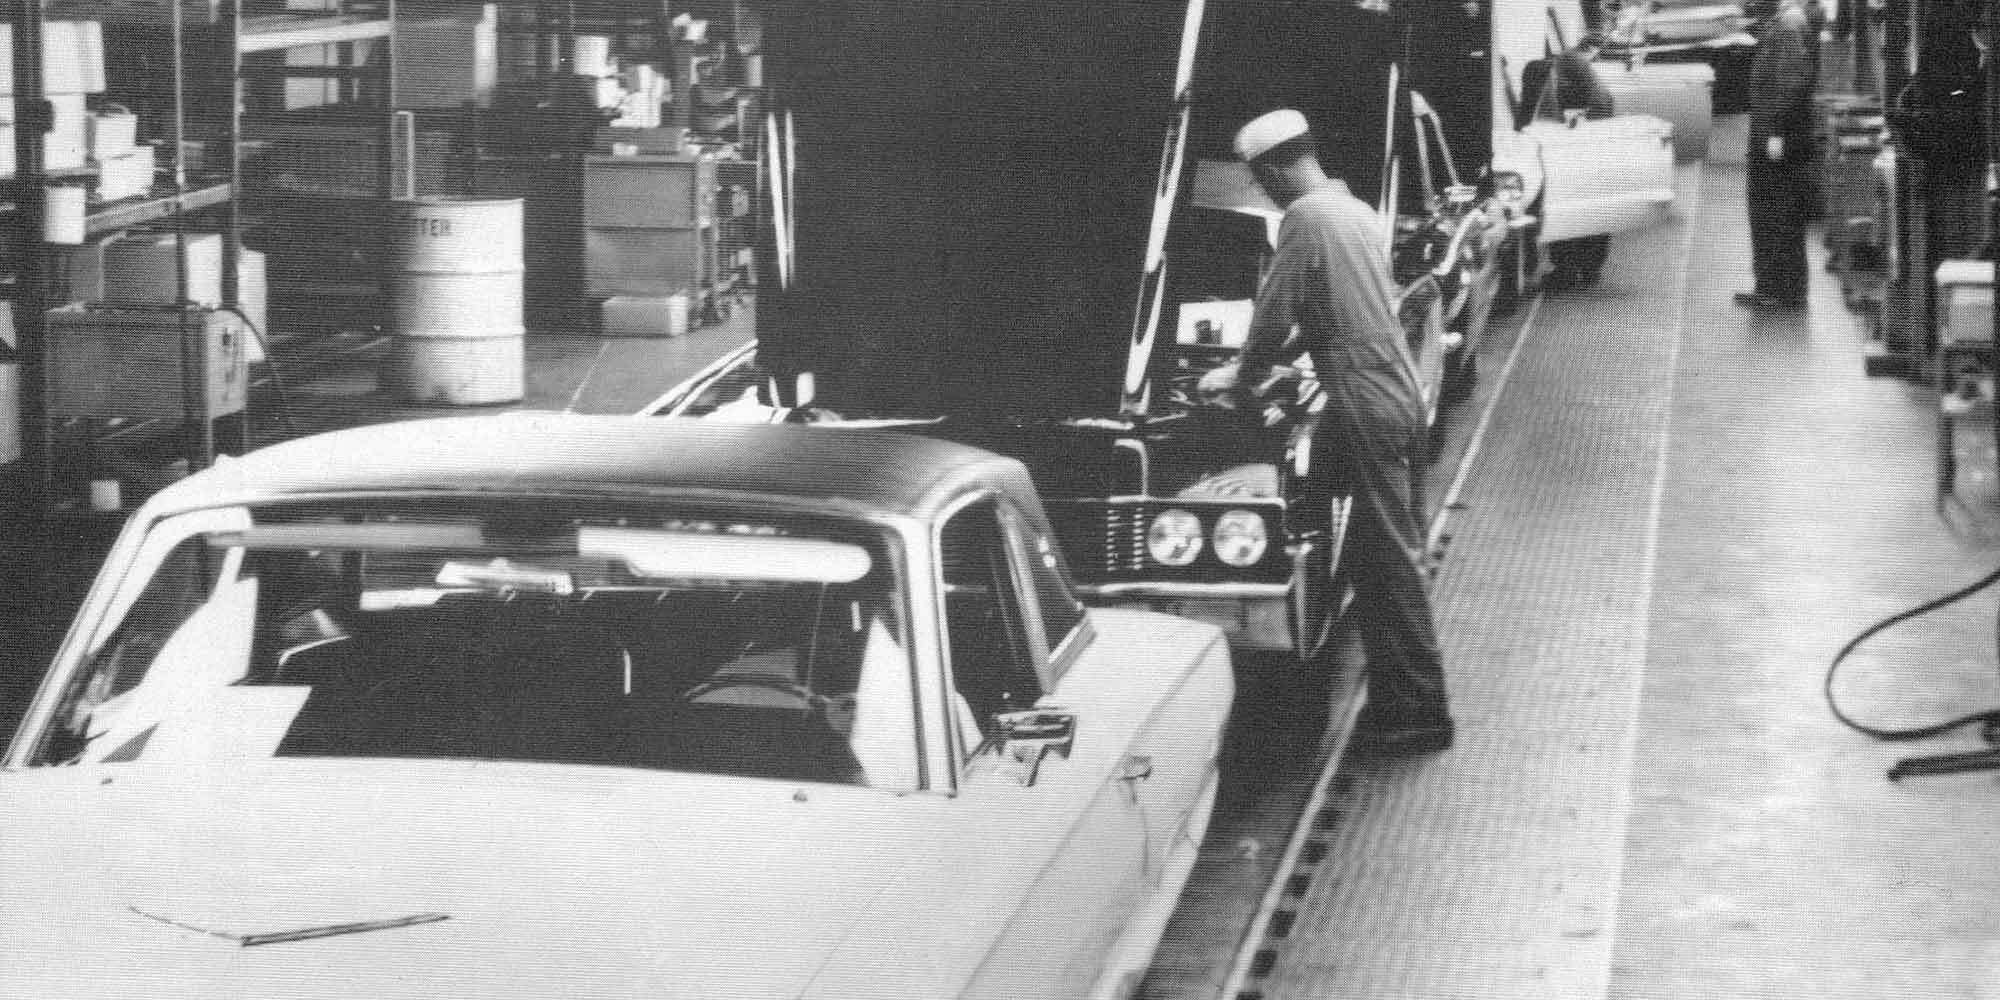 The Wixom Michigan Lincoln/Thunderbird assembly plant, fall of 1965.